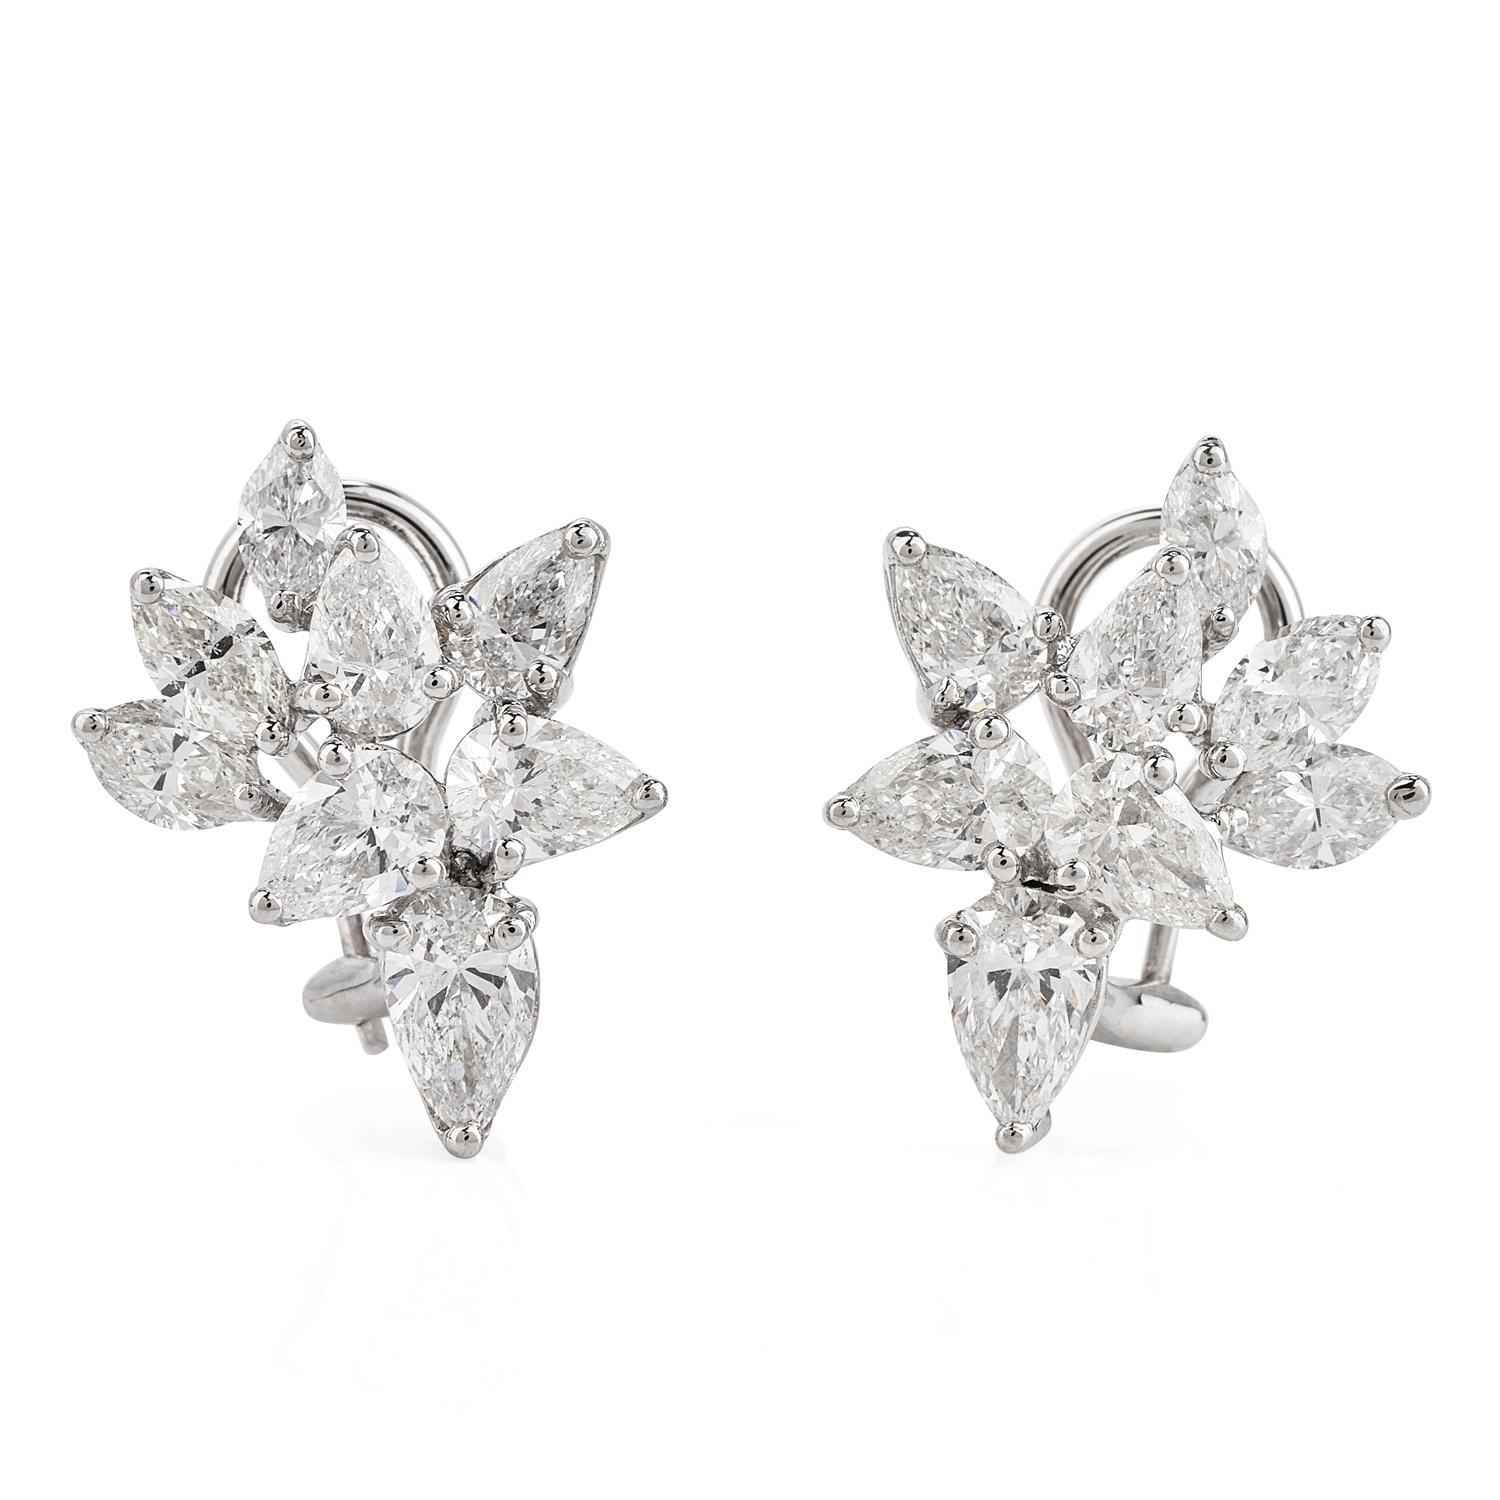 Add some gleaming beauty to your life with these elegant Diamond Platinum Pear-shape, Marquise-cut,  Cluster Clip Back Platinum Earrings!  

These alluring earrings boast 18 genuine natural diamonds with marquise and pear shape totaling  6.20 carats